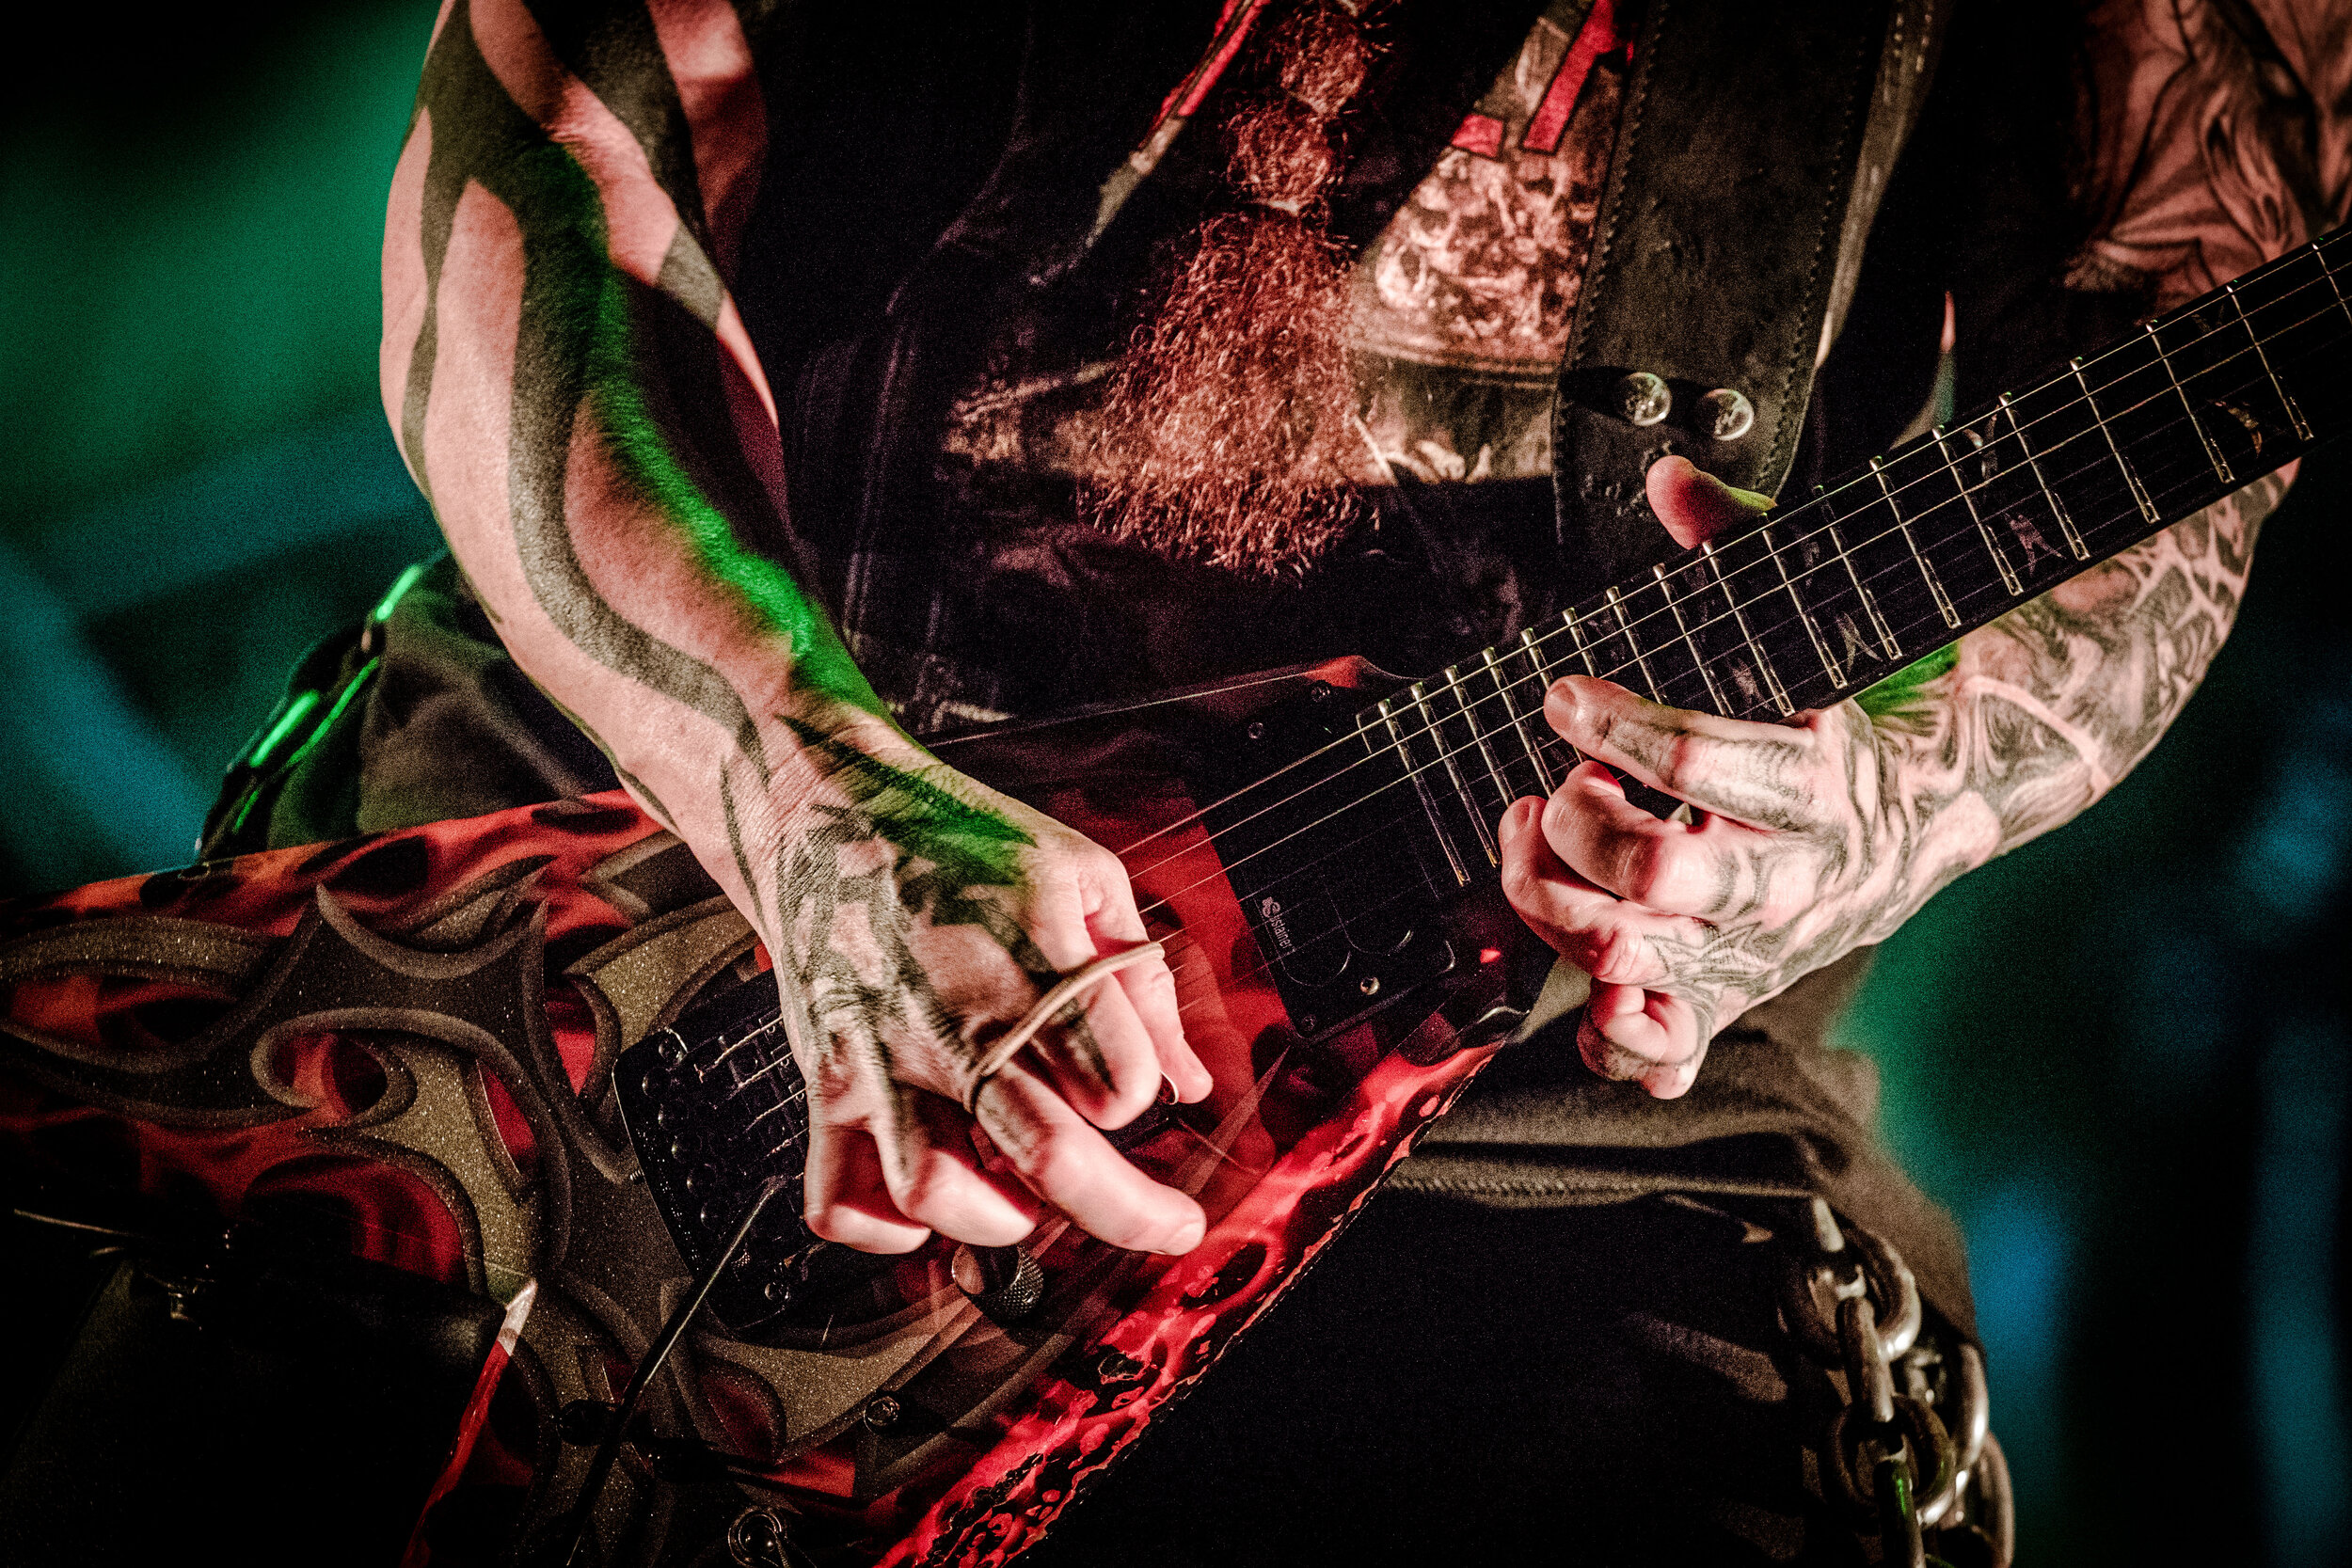 SLAYER With Full Force 2016 by Dirk Behlau-5647.jpg